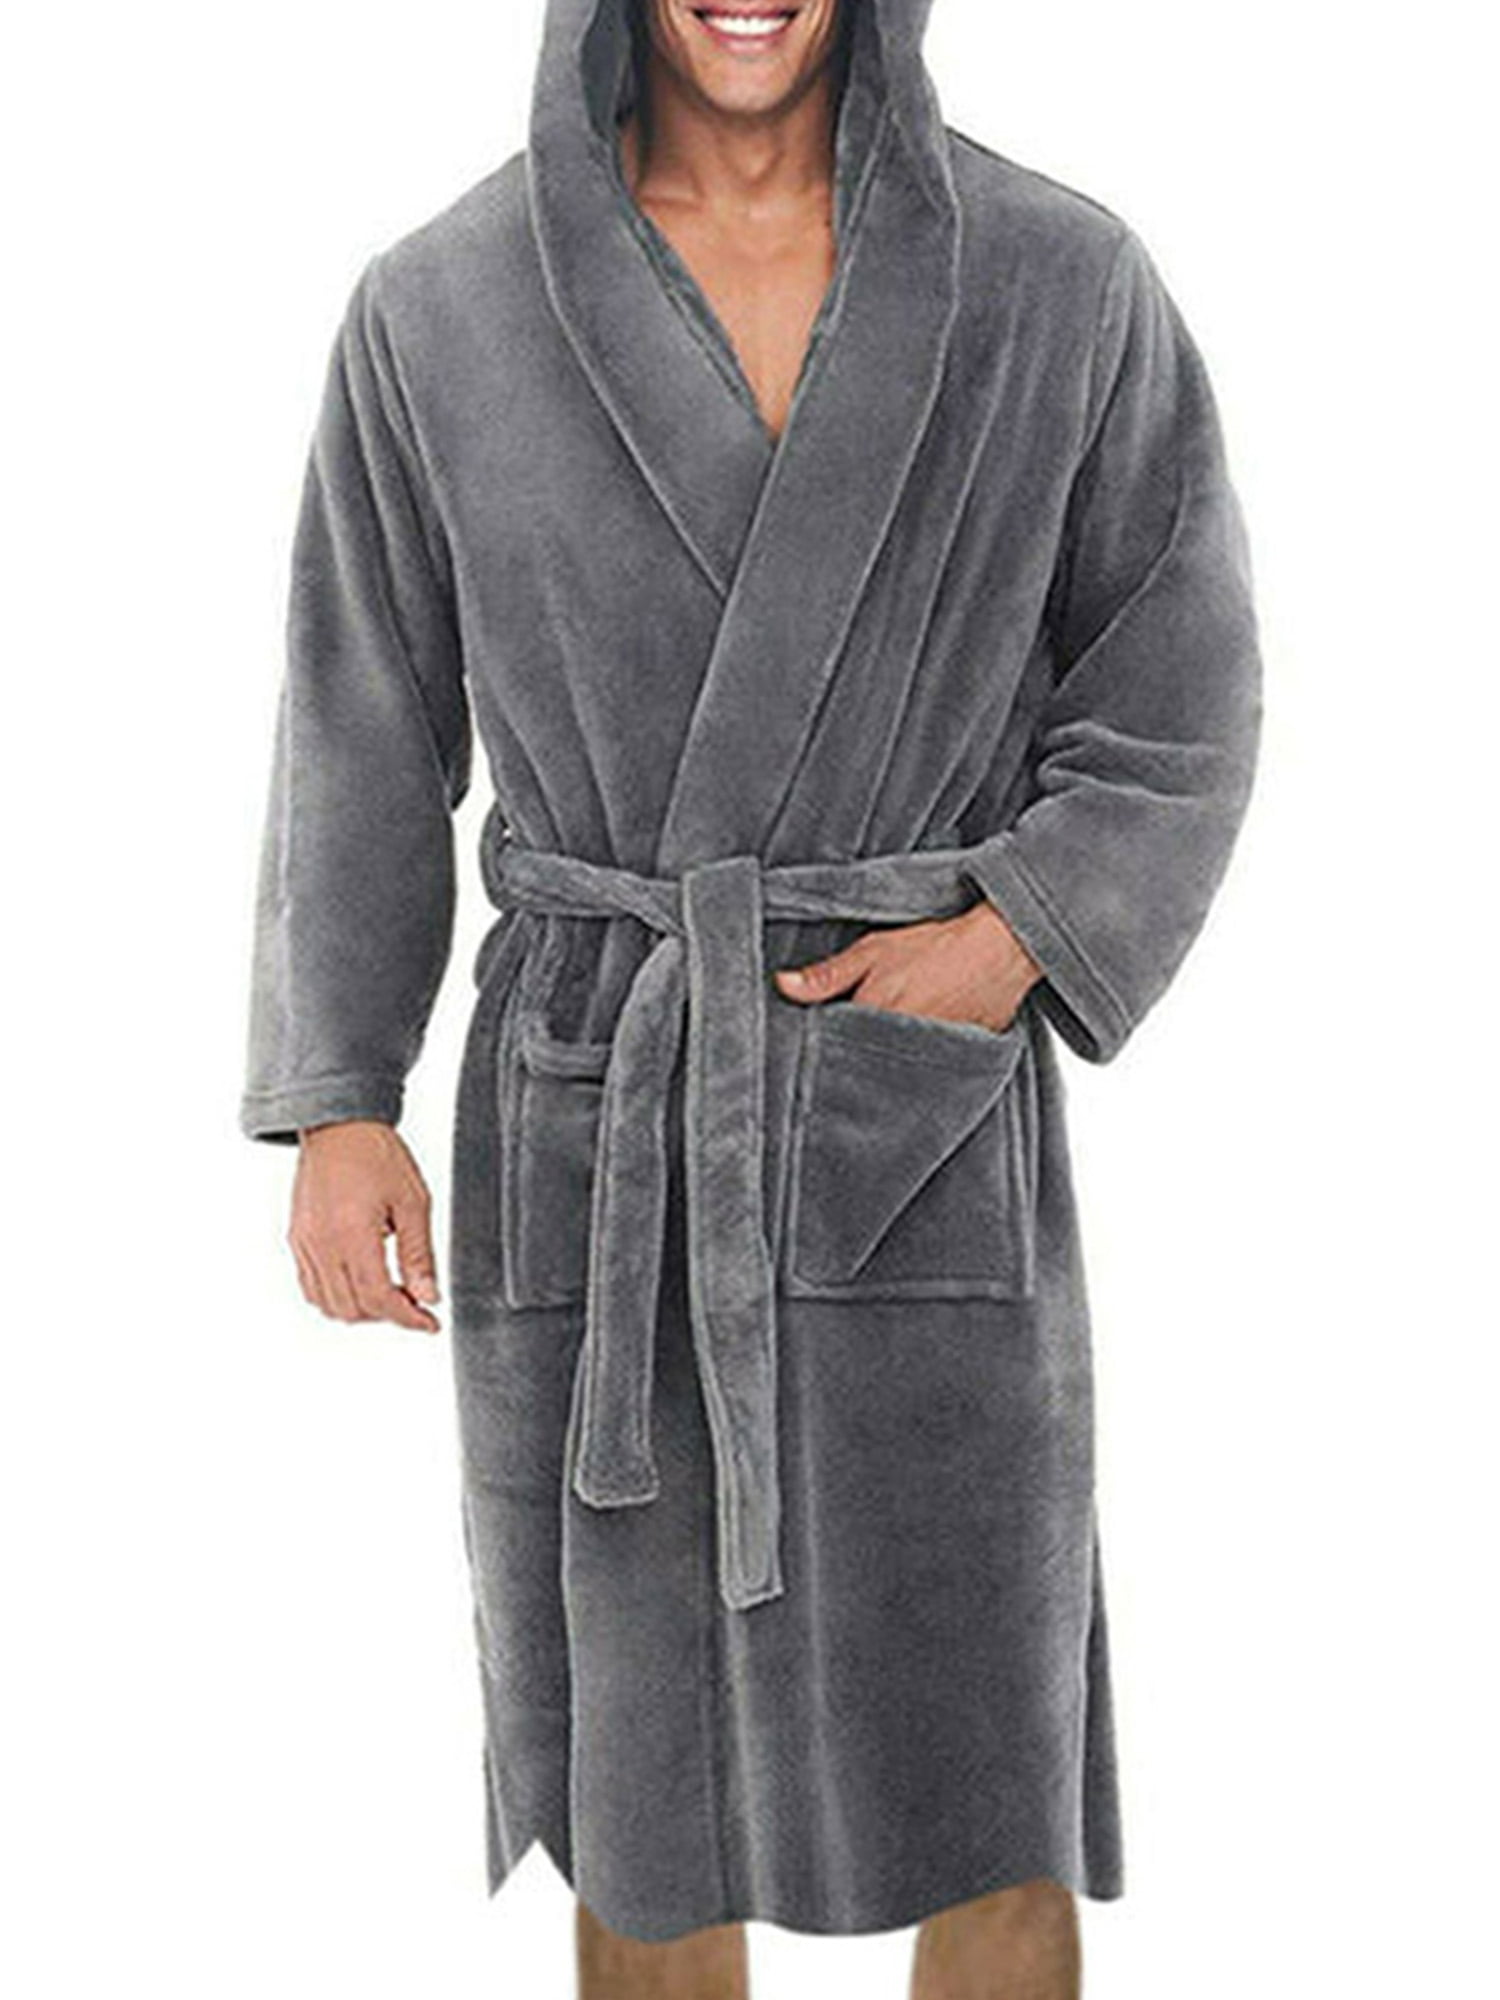 Extra Long Thick Warm Grid Flannel Towel Bathrobe Women For Men And Women  Winter Thermal Dressing Gown From Uikta, $39.39 | DHgate.Com